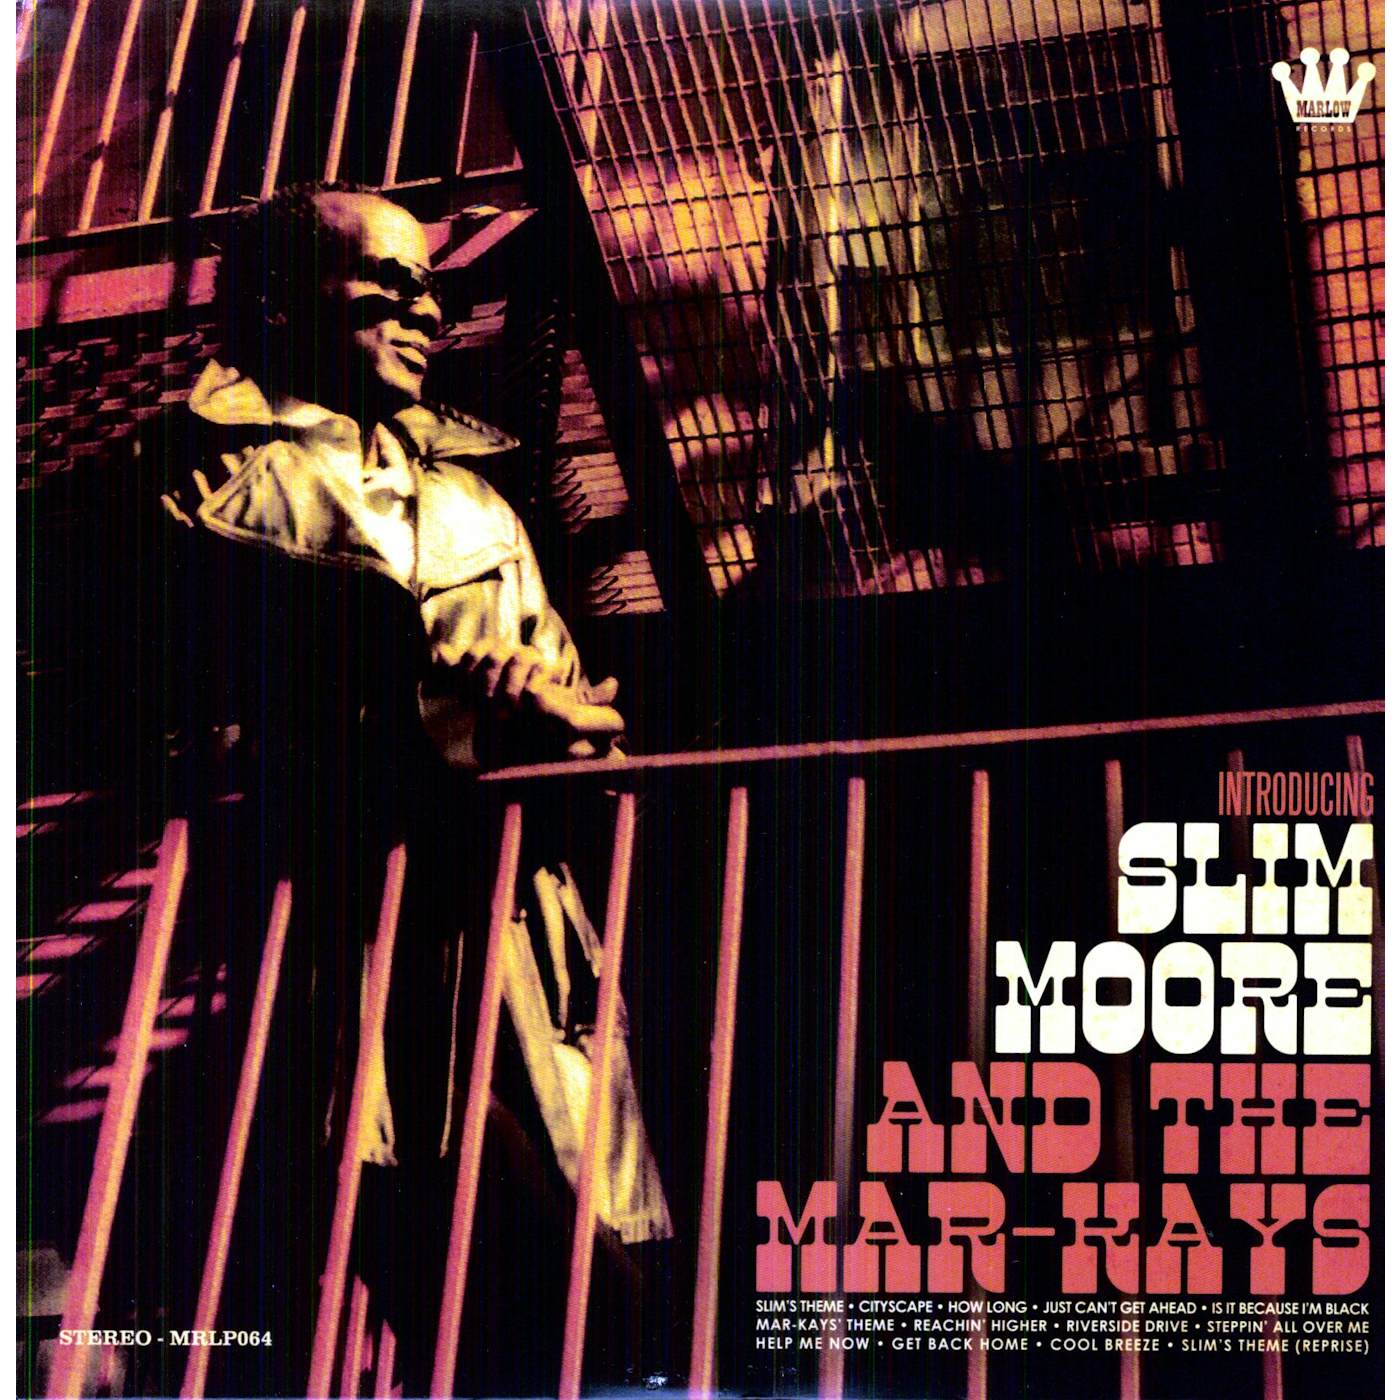 Introducing Slim Moore and the Mar-Kays Vinyl Record